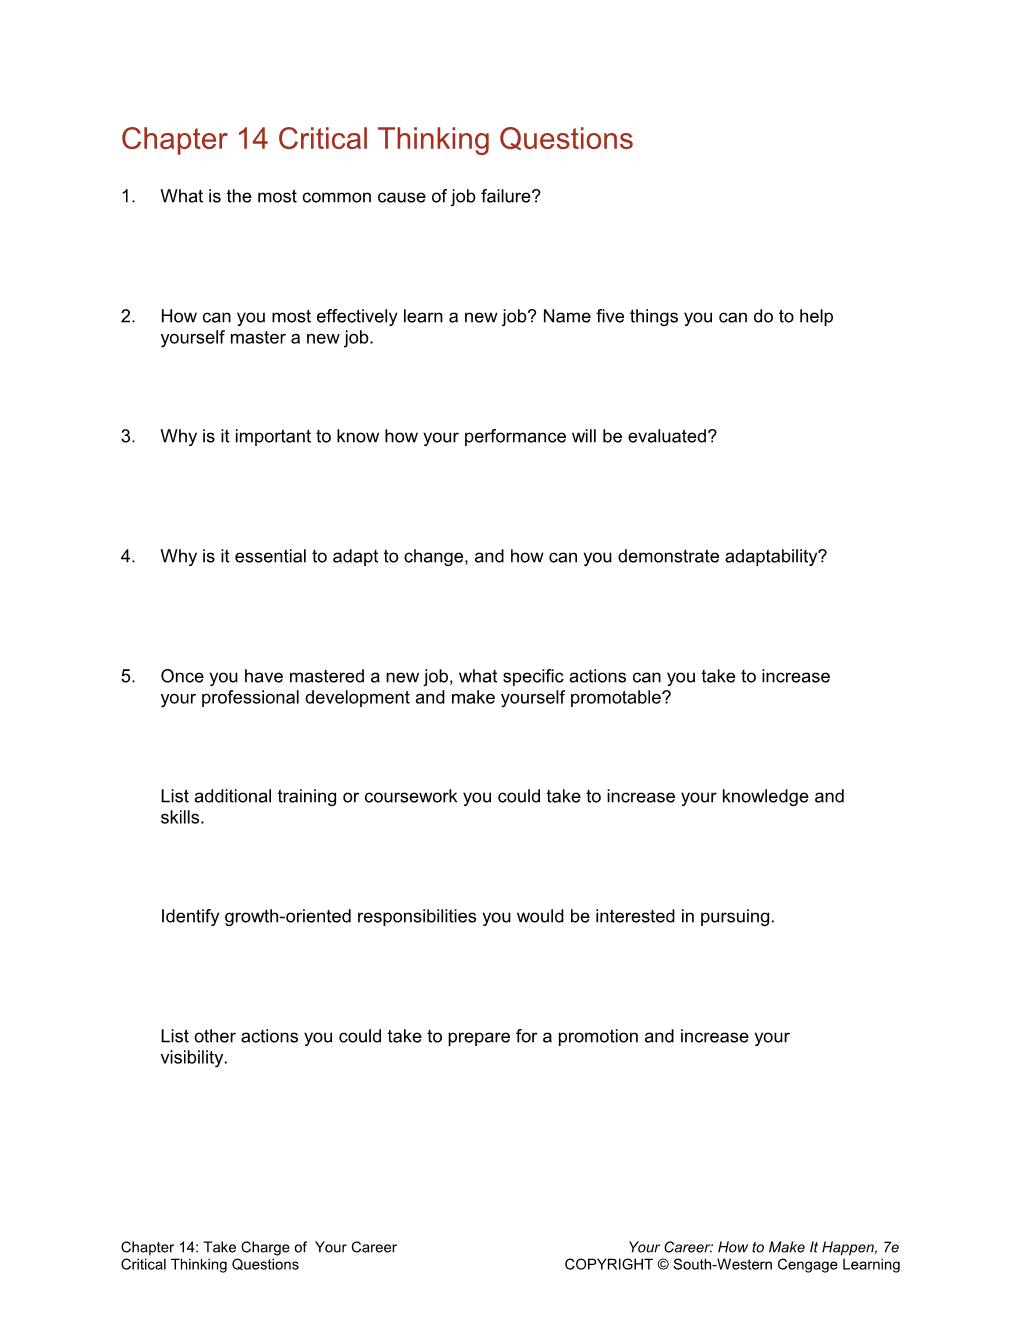 Chapter 14 Critical Thinking Questions s1